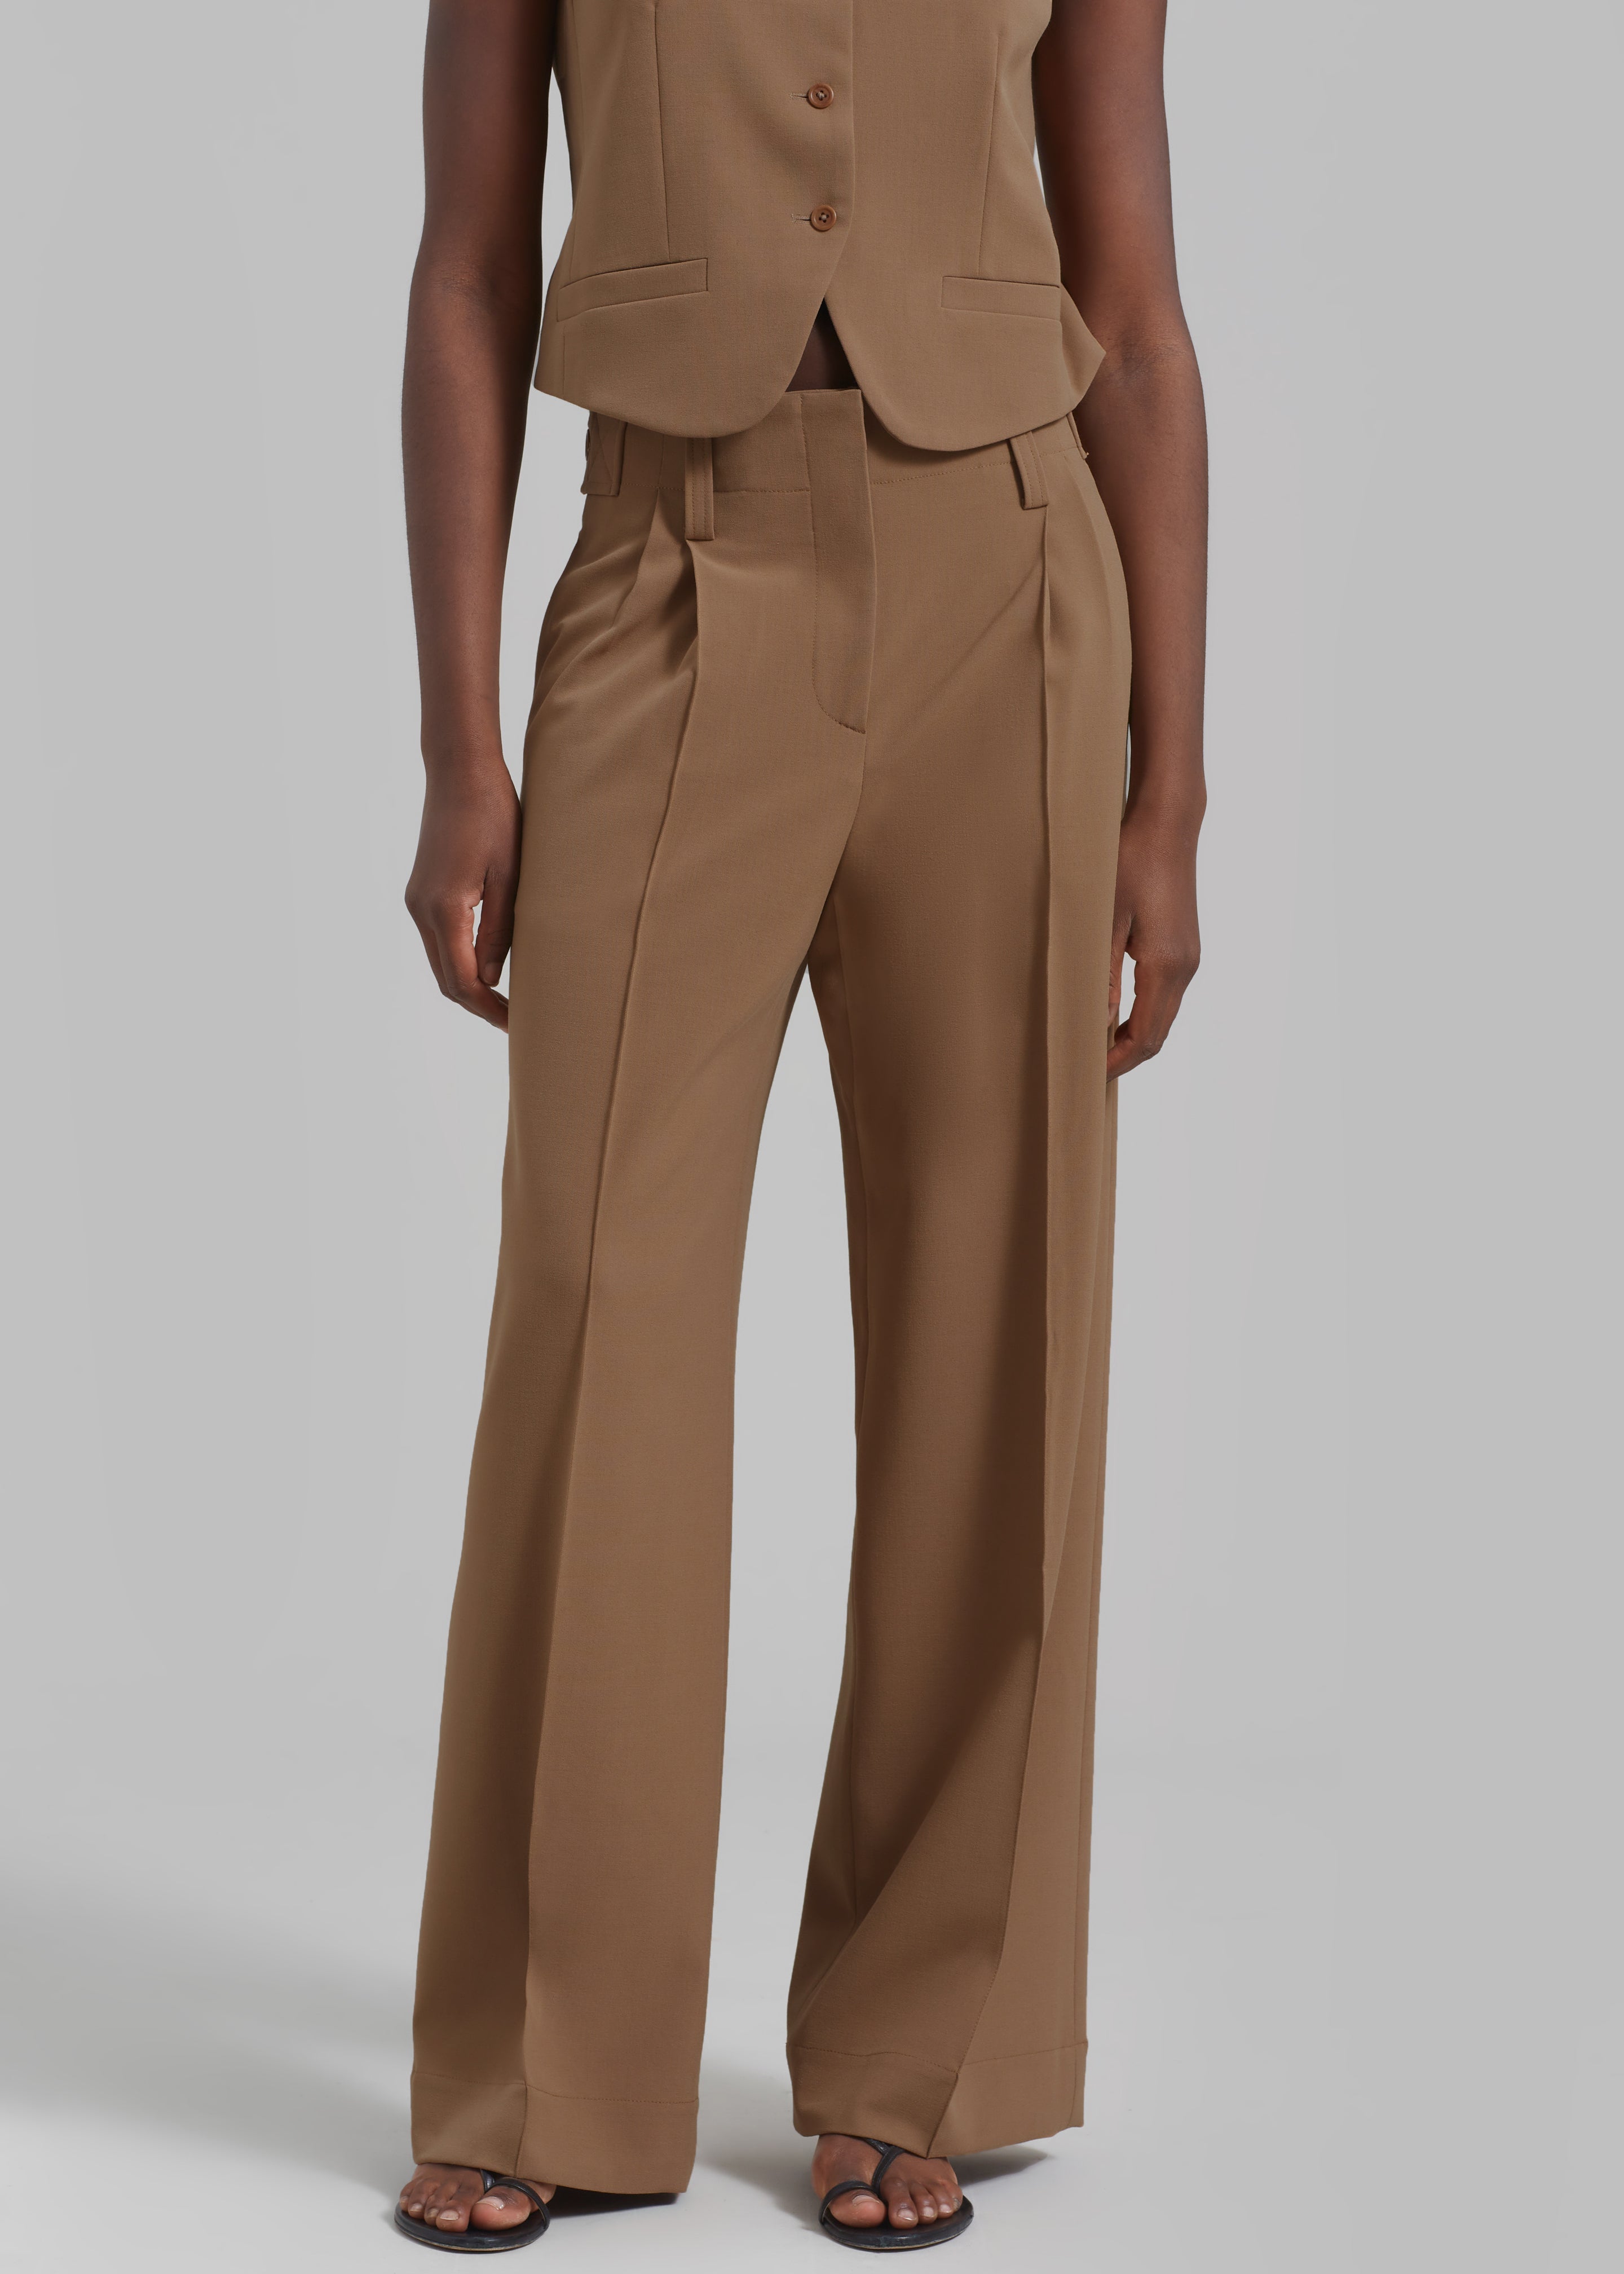 Beaufille Ulla Trousers - Camel - 2